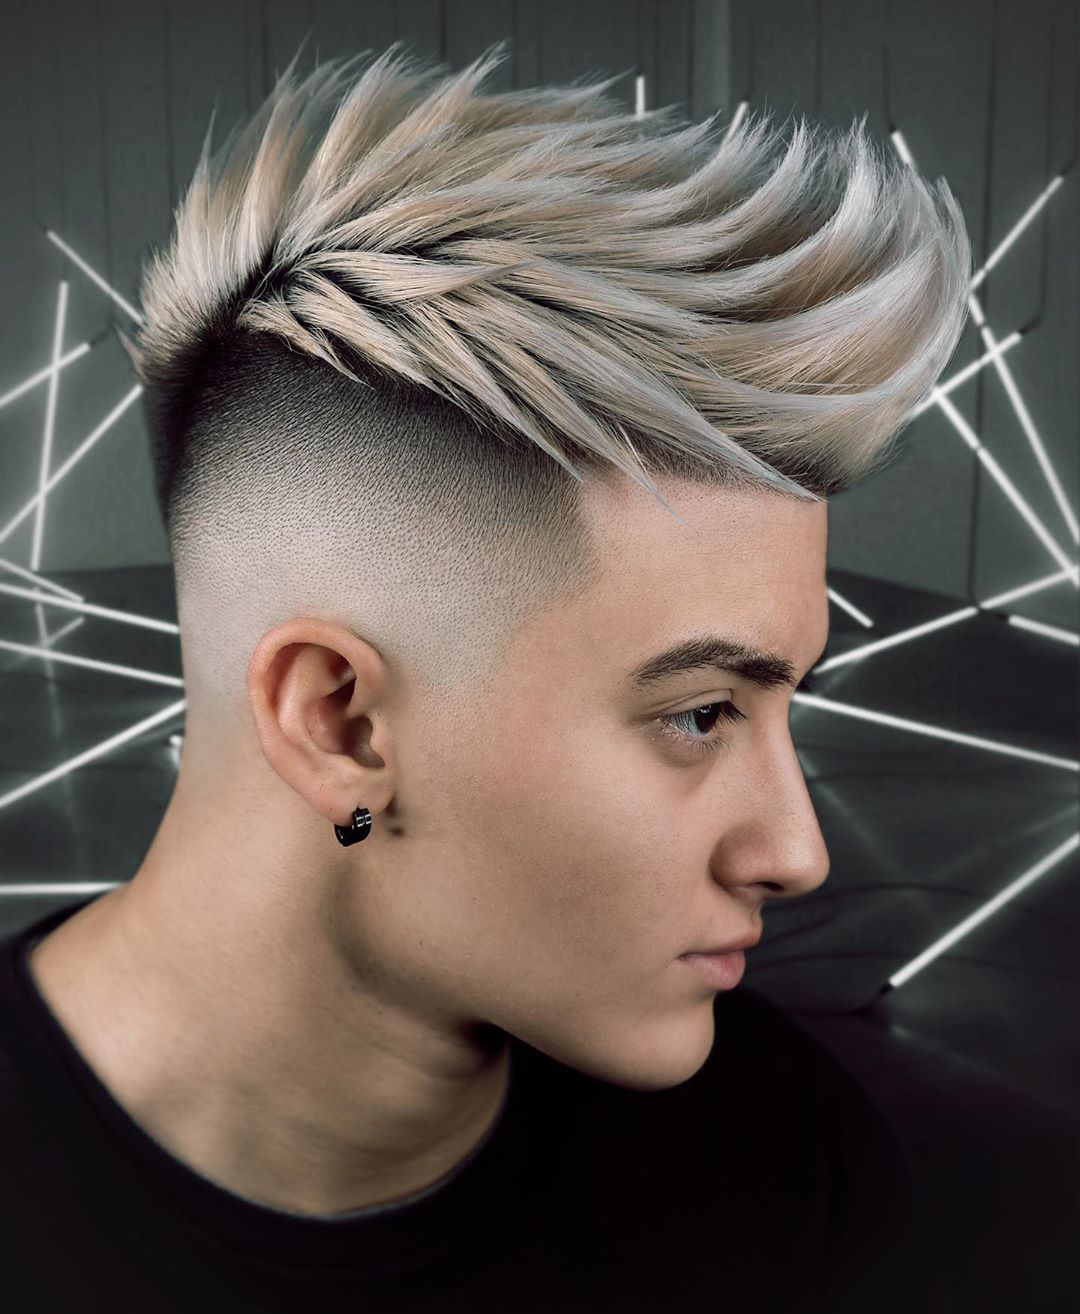 60 Best Young Men’s Haircuts，The Latest Young Men’s Hairstyles Spiky Hair